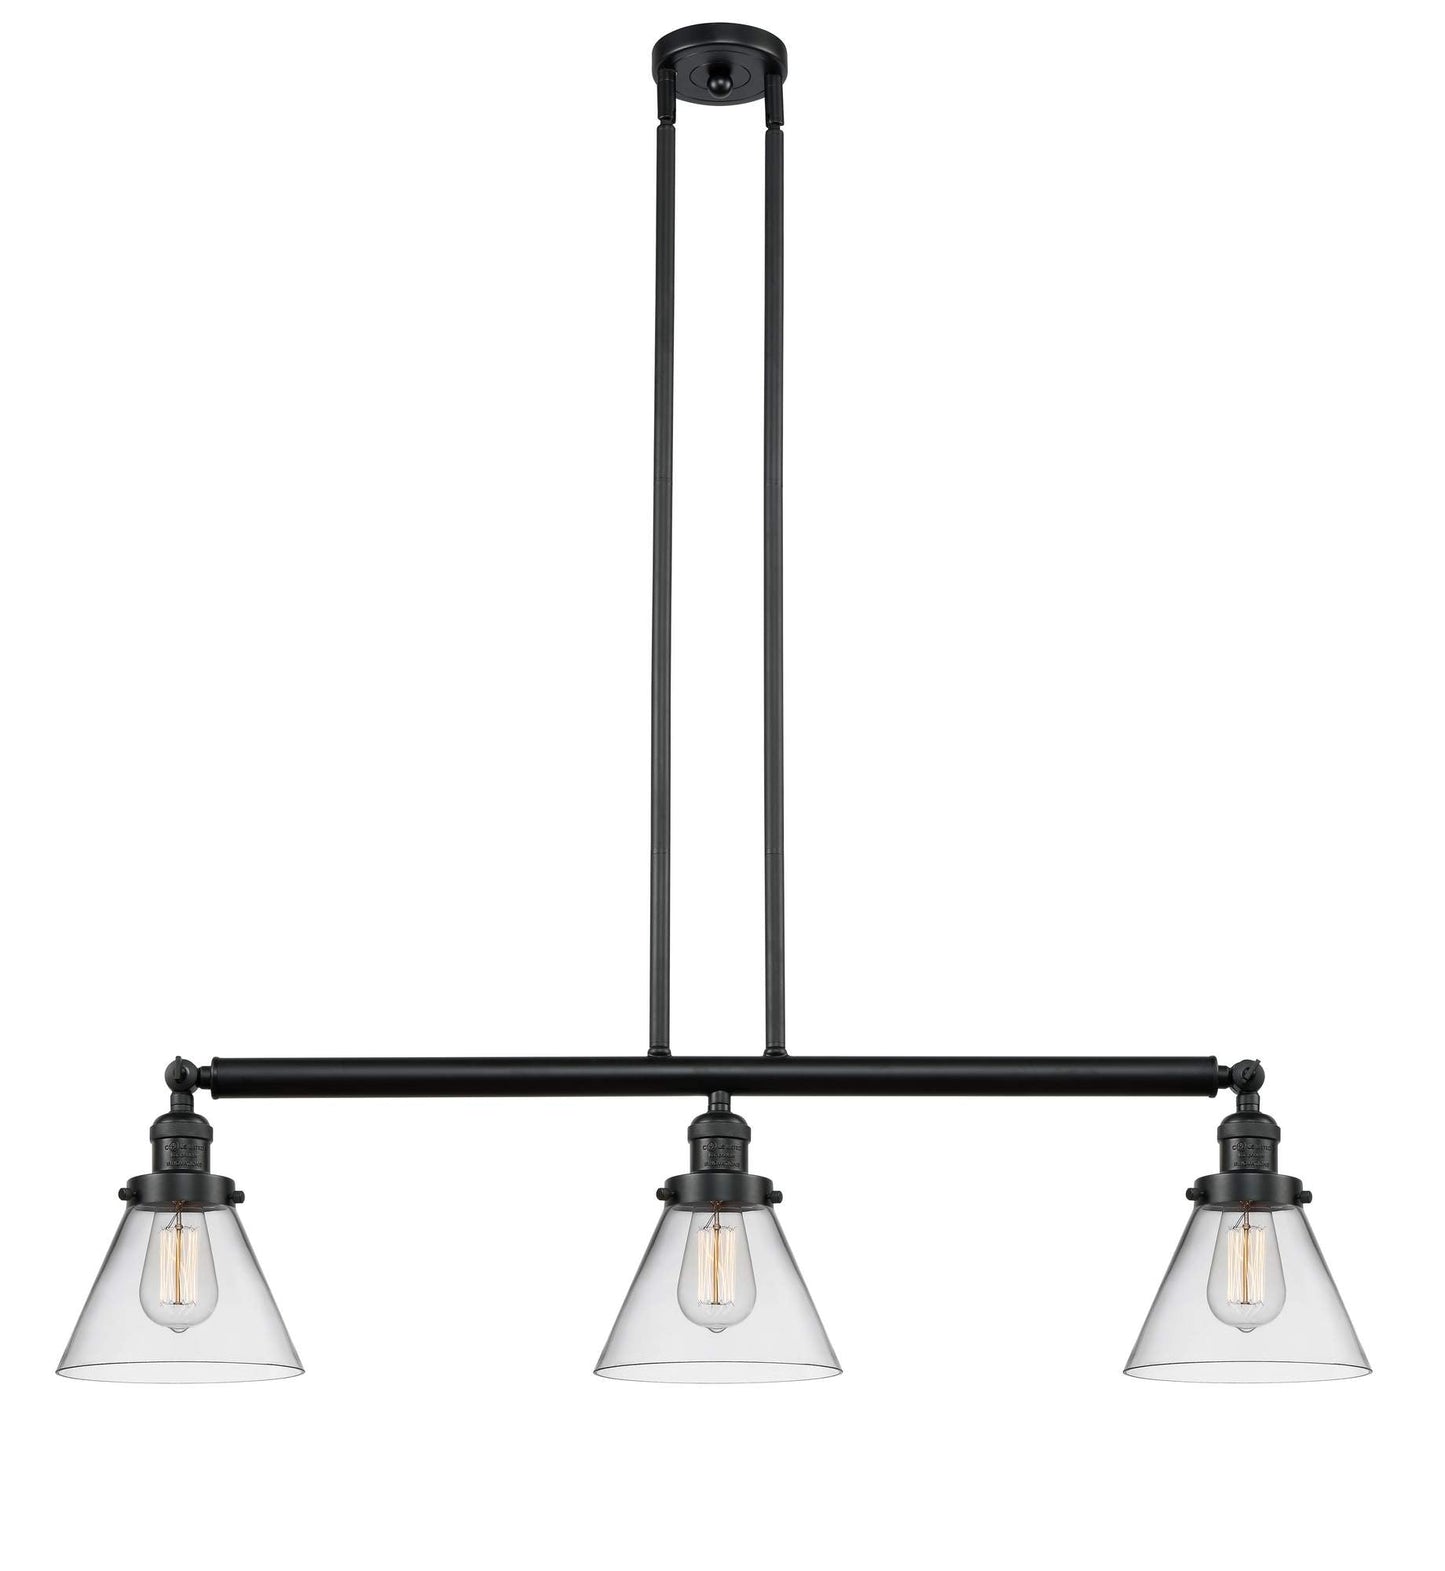 213-BK-G42 3-Light 40.25" Matte Black Island Light - Clear Large Cone Glass - LED Bulb - Dimmensions: 40.25 x 7.75 x 10<br>Minimum Height : 20.25<br>Maximum Height : 44.25 - Sloped Ceiling Compatible: Yes